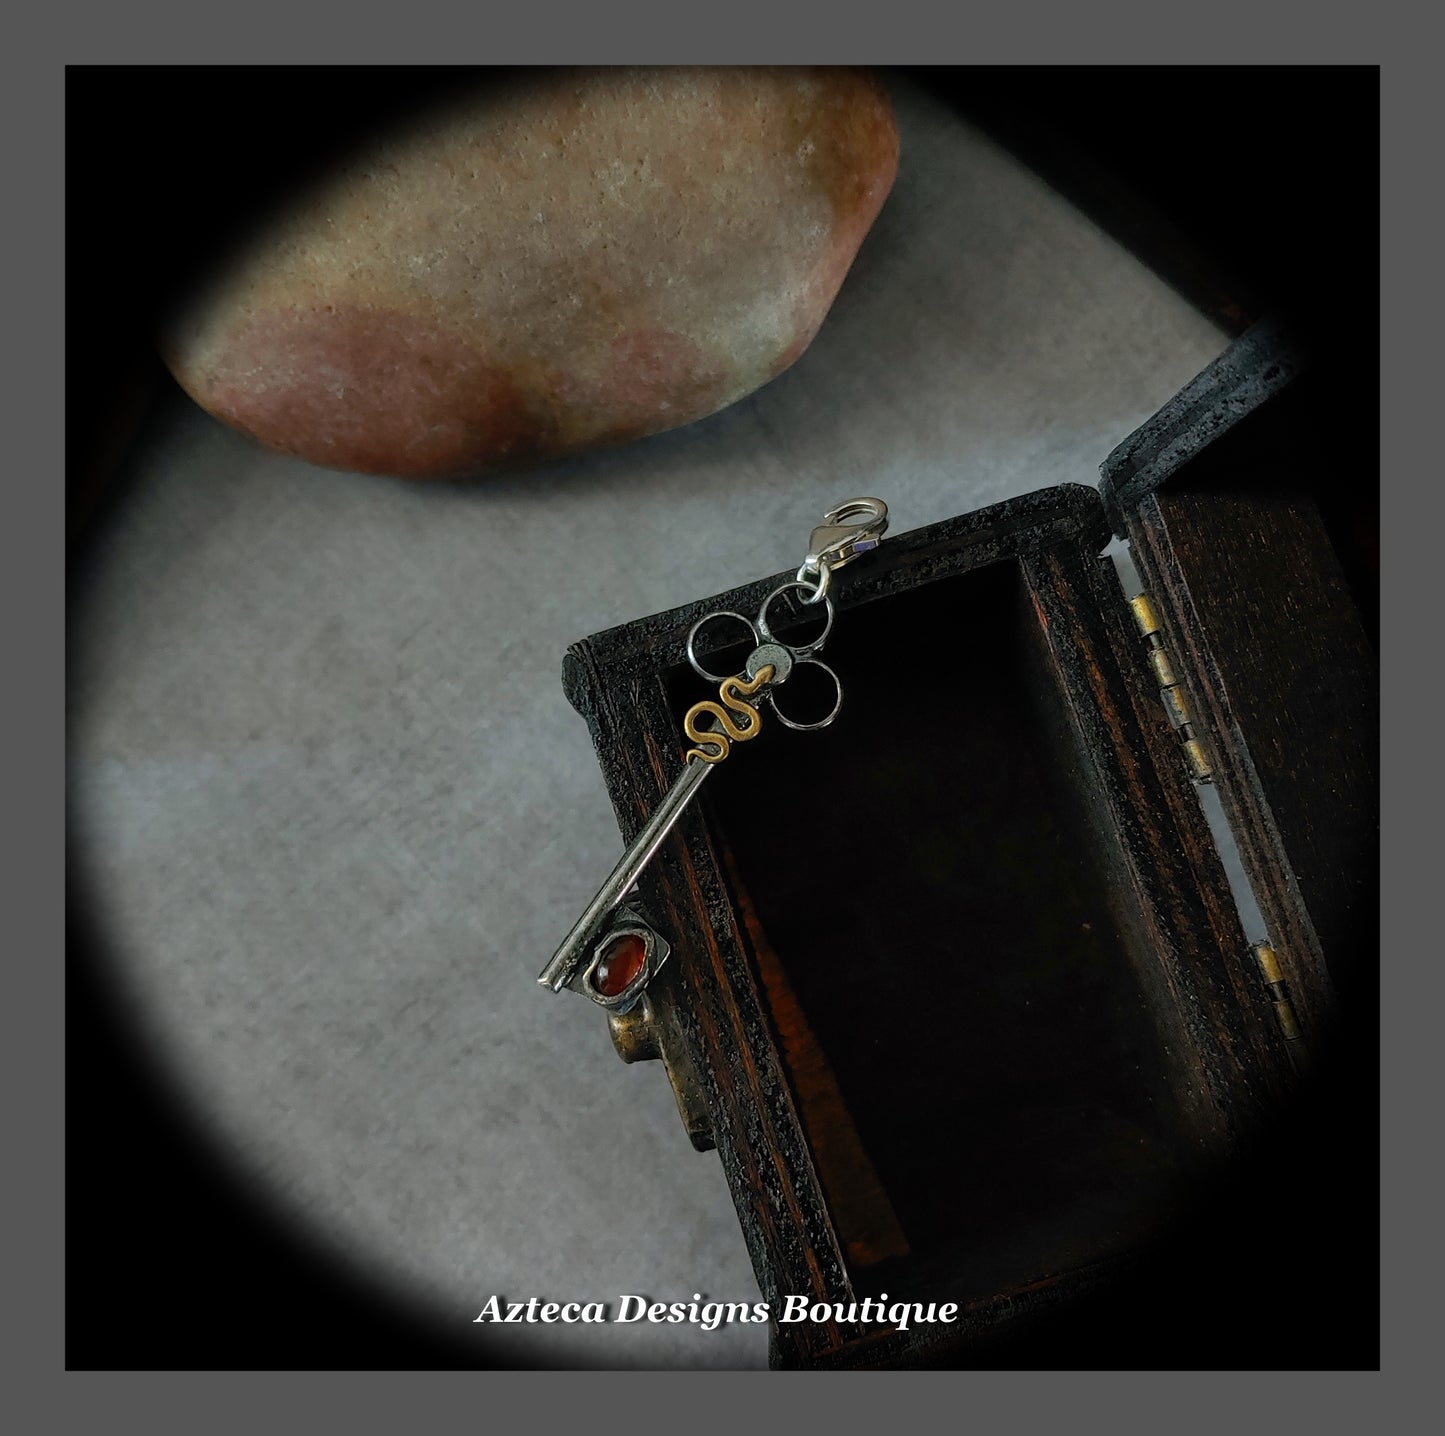 Amber Key Pendant with Lobster Clasp + Hand Fabricated Argentium Silver + Blackened Finish